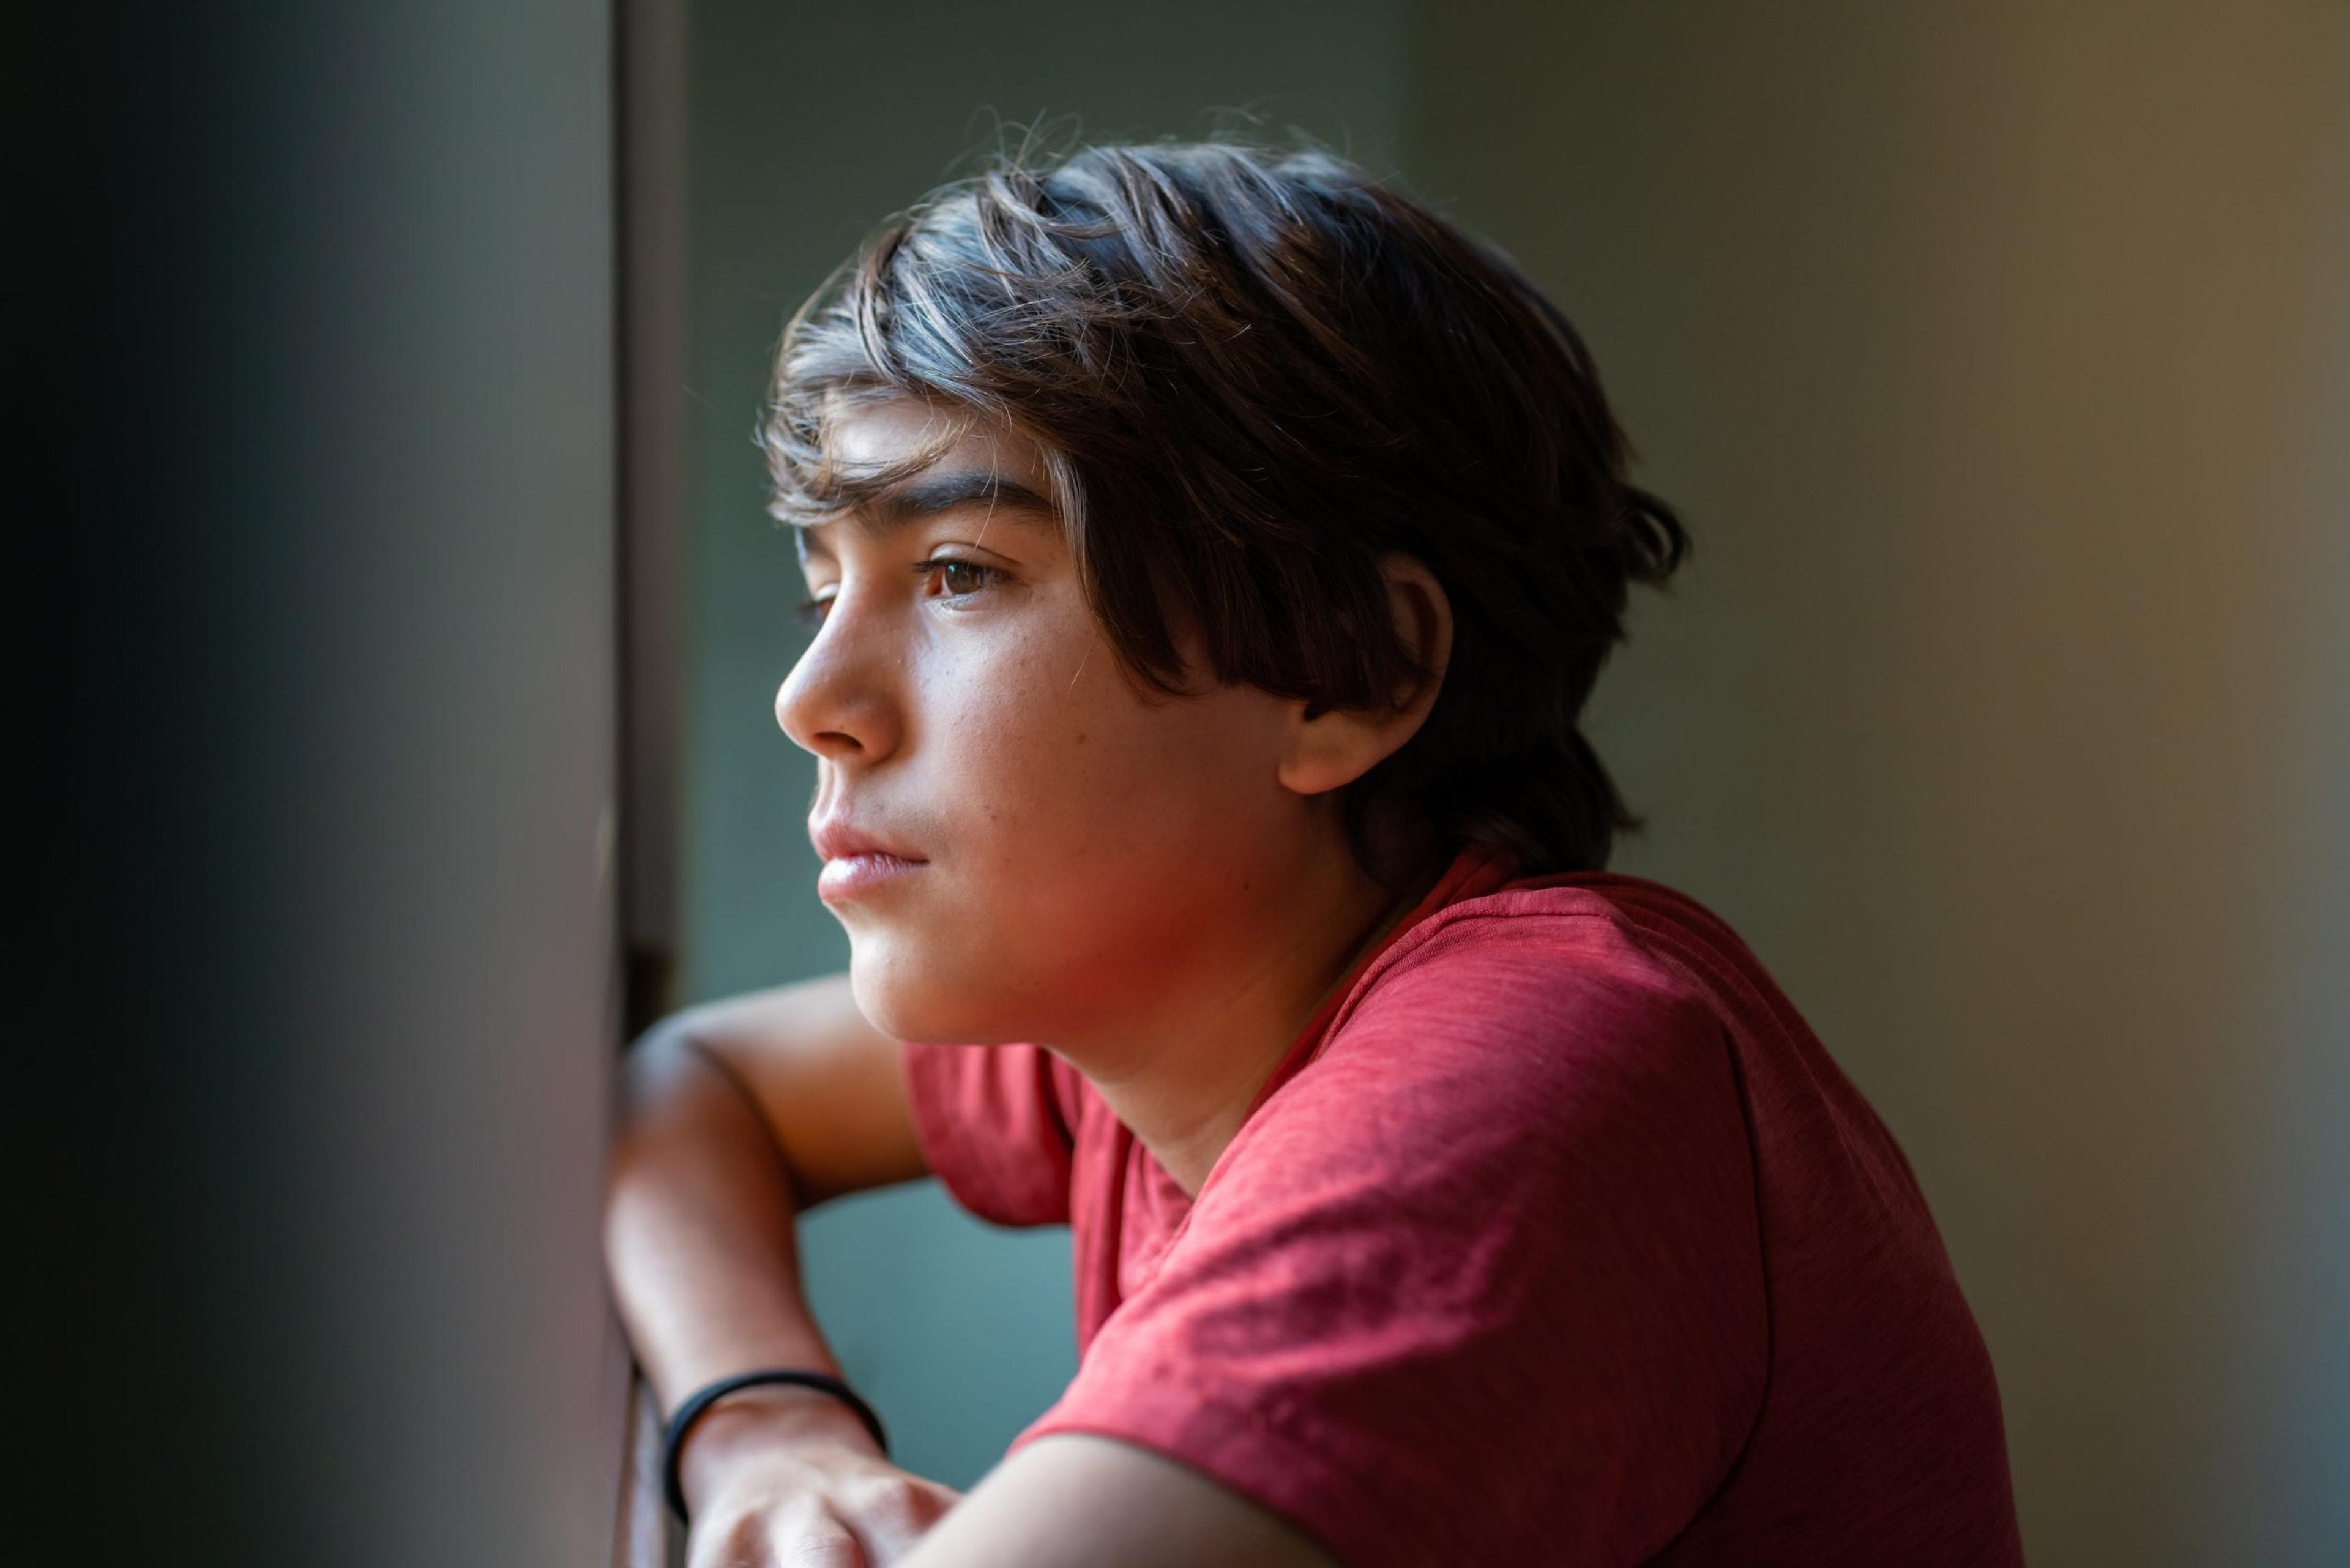 Young man looking out window